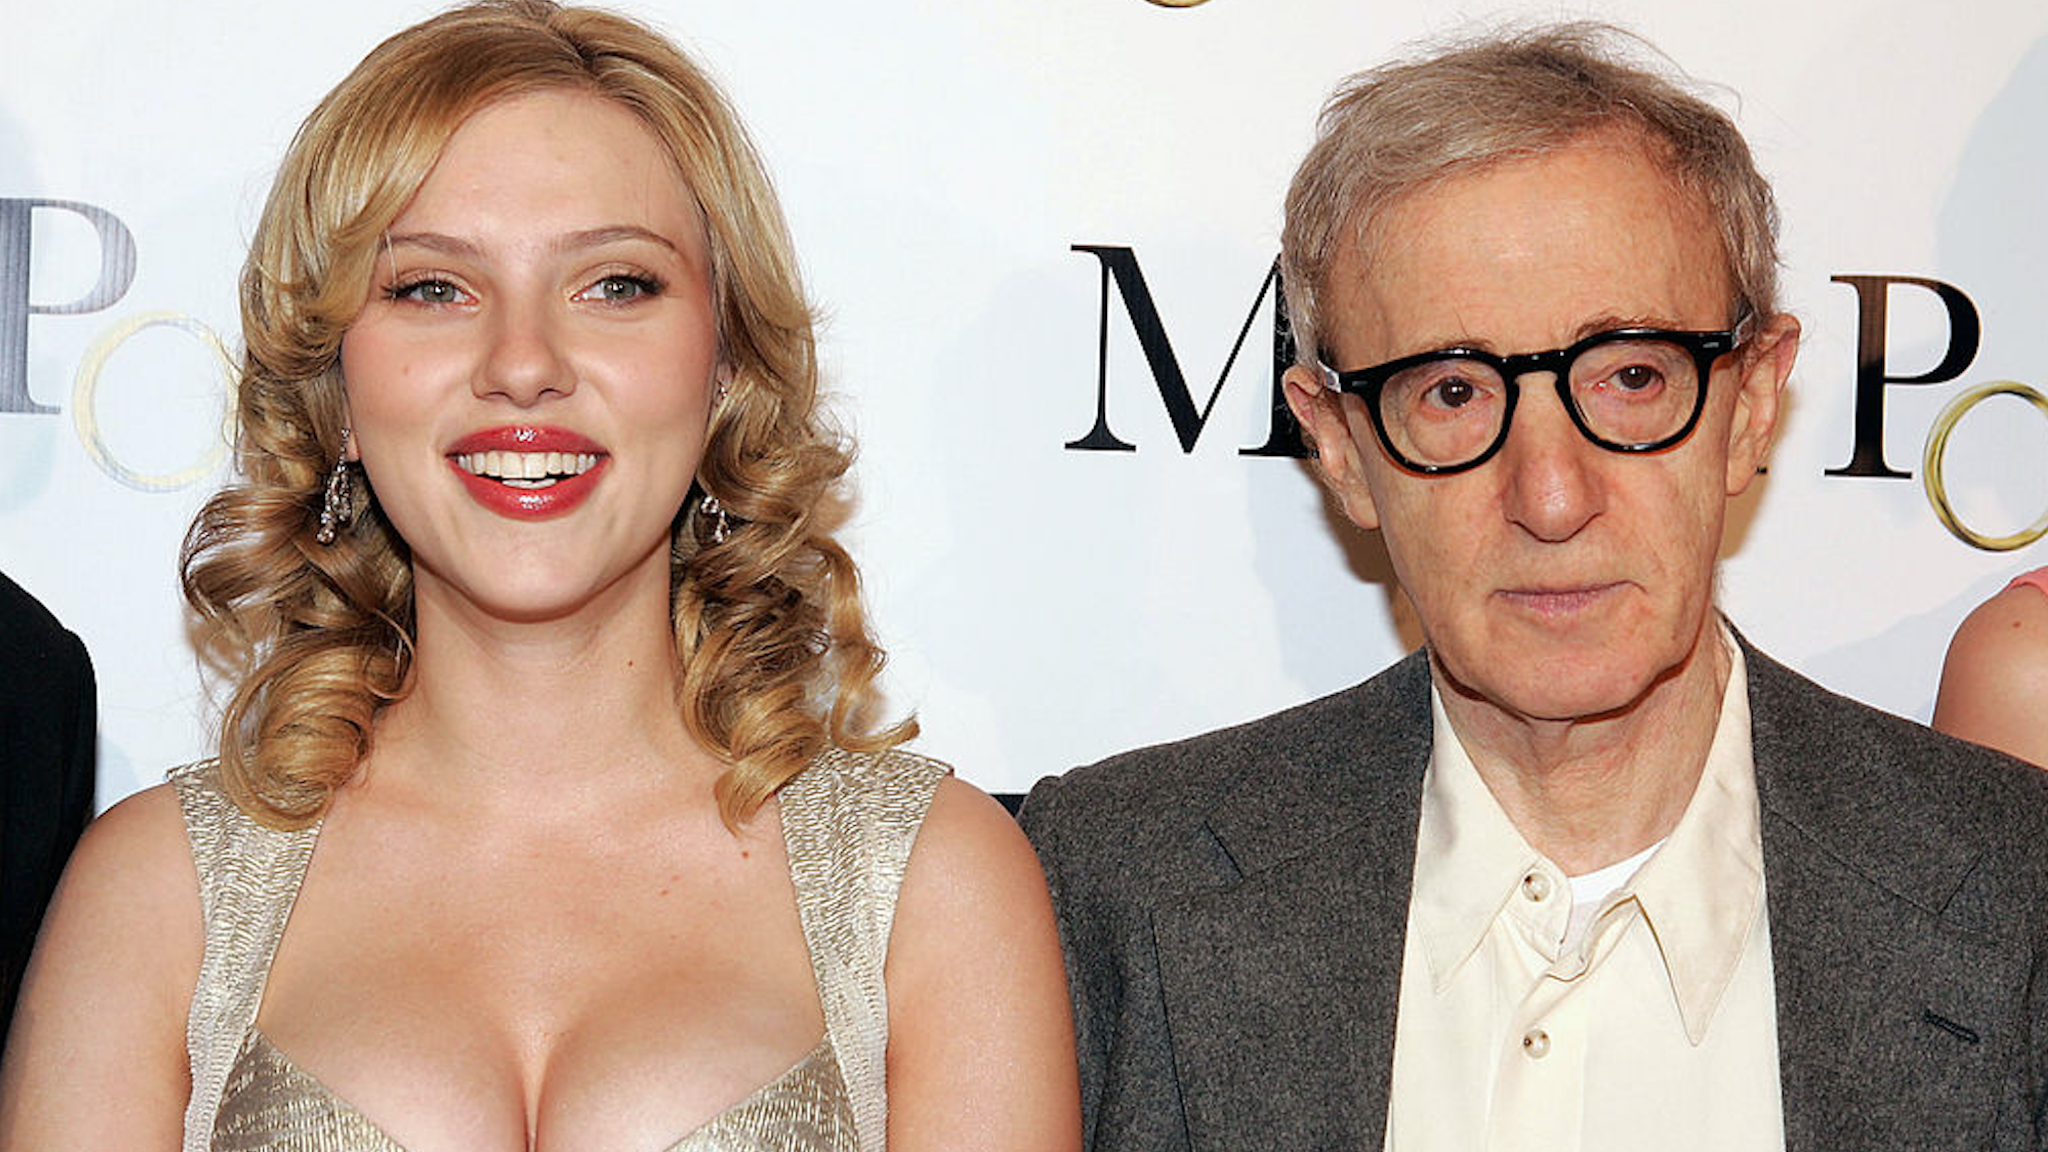 Actress Scarlett Johansson (L) and writer/director Woody Allen pose at the premiere of DreamWorks' "Match Point" at the Los Angeles County Museum of Art on December 8, 2005 in Los Angeles, California.